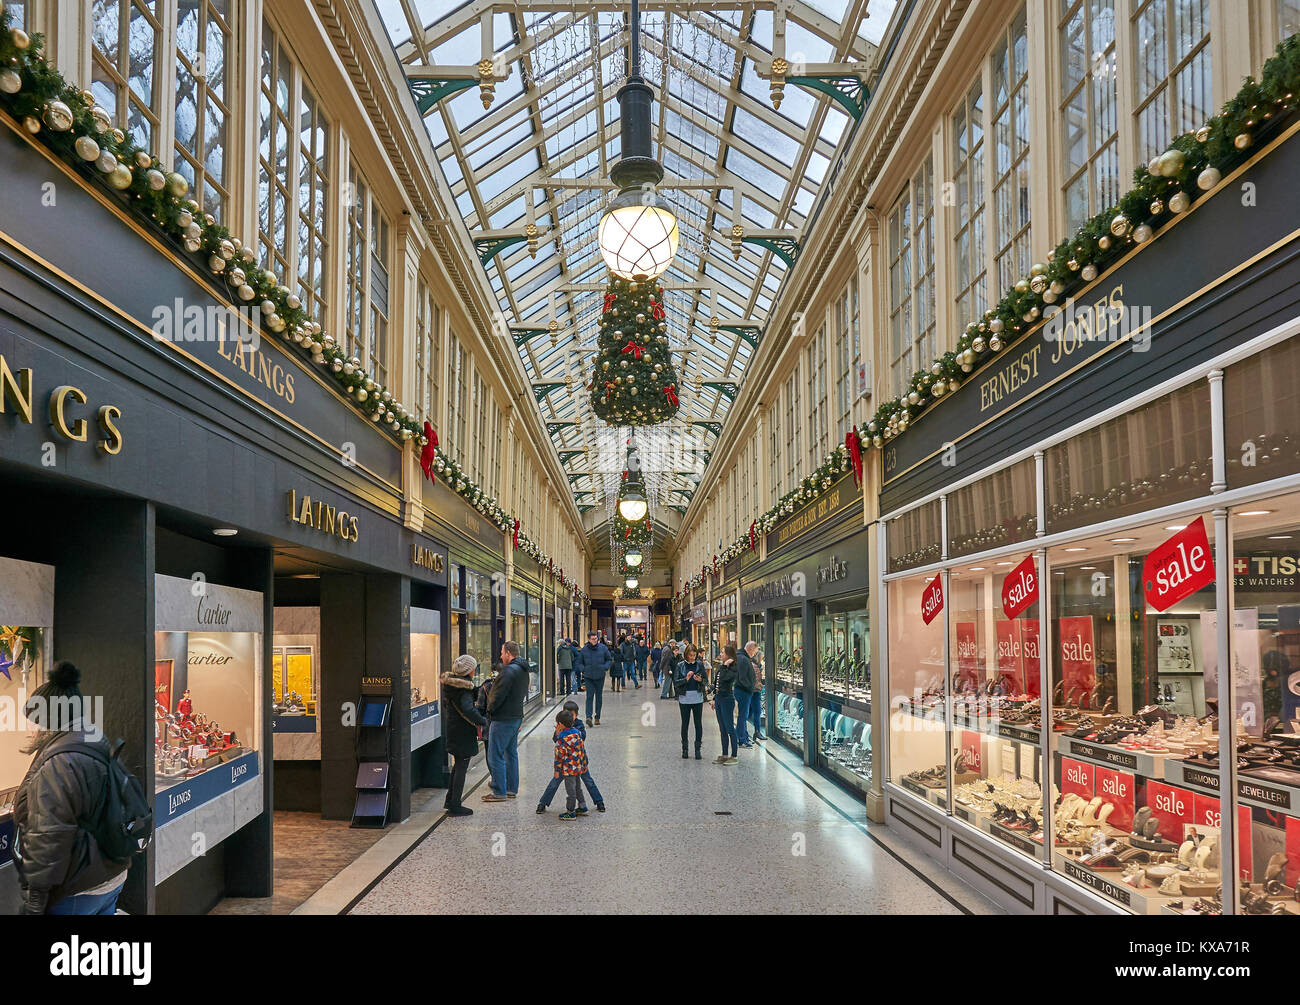 The Argyll Arcade, a diamond jewellery centre in the city center of Glasgow with Christmas decorations on. Stock Photo